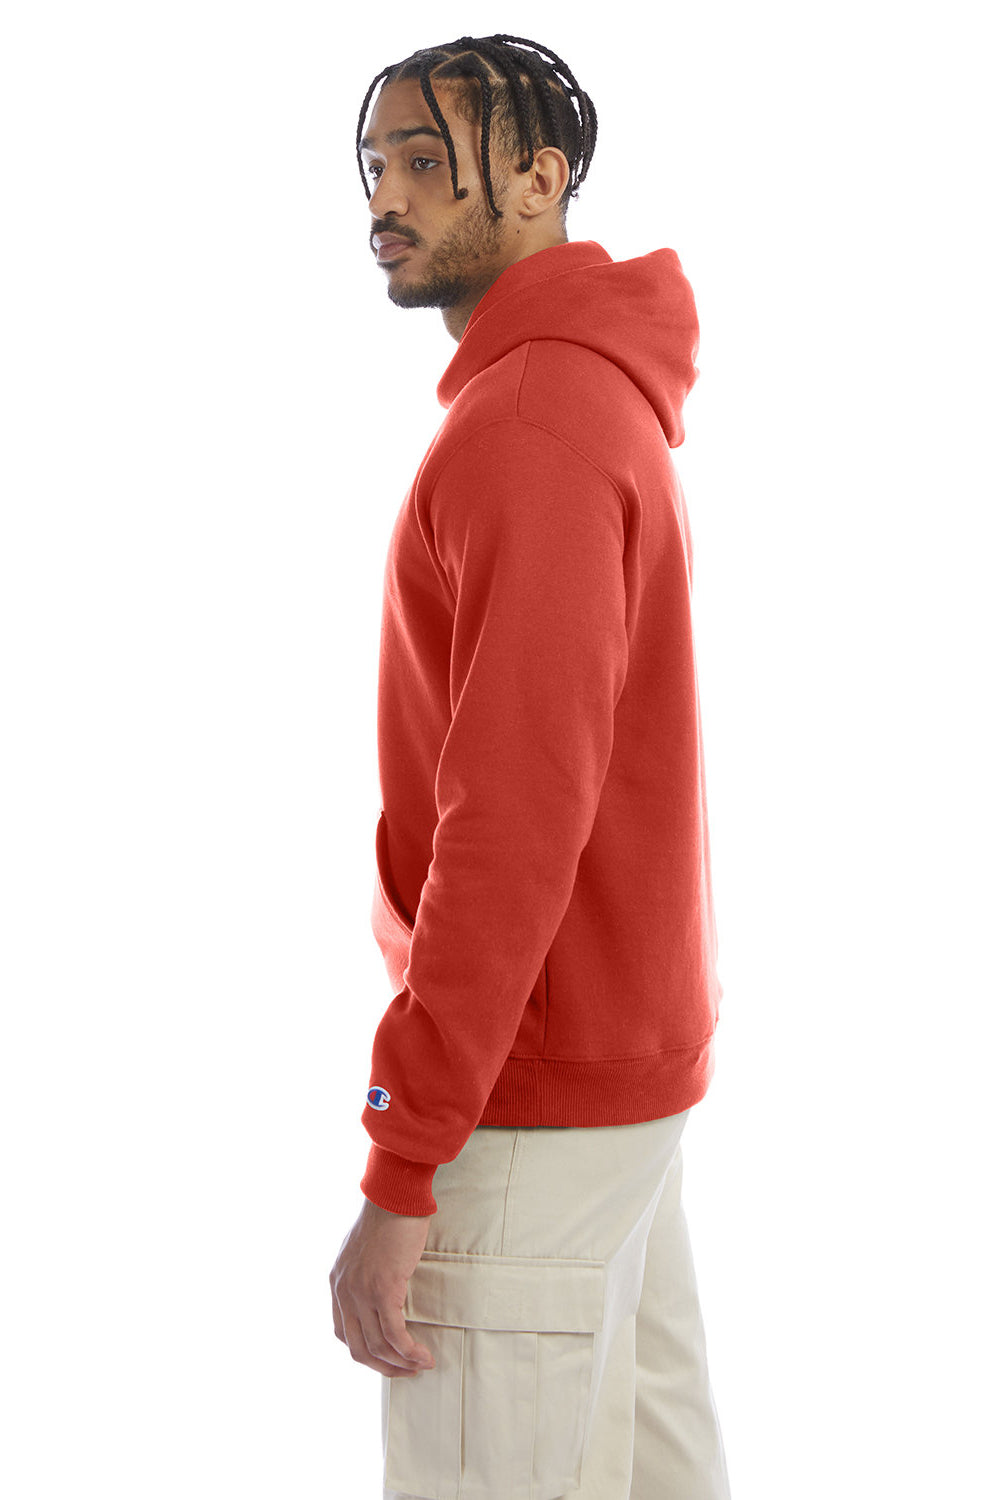 Champion S700 Mens Double Dry Eco Moisture Wicking Fleece Hooded Sweatshirt Hoodie Red River Clay SIde